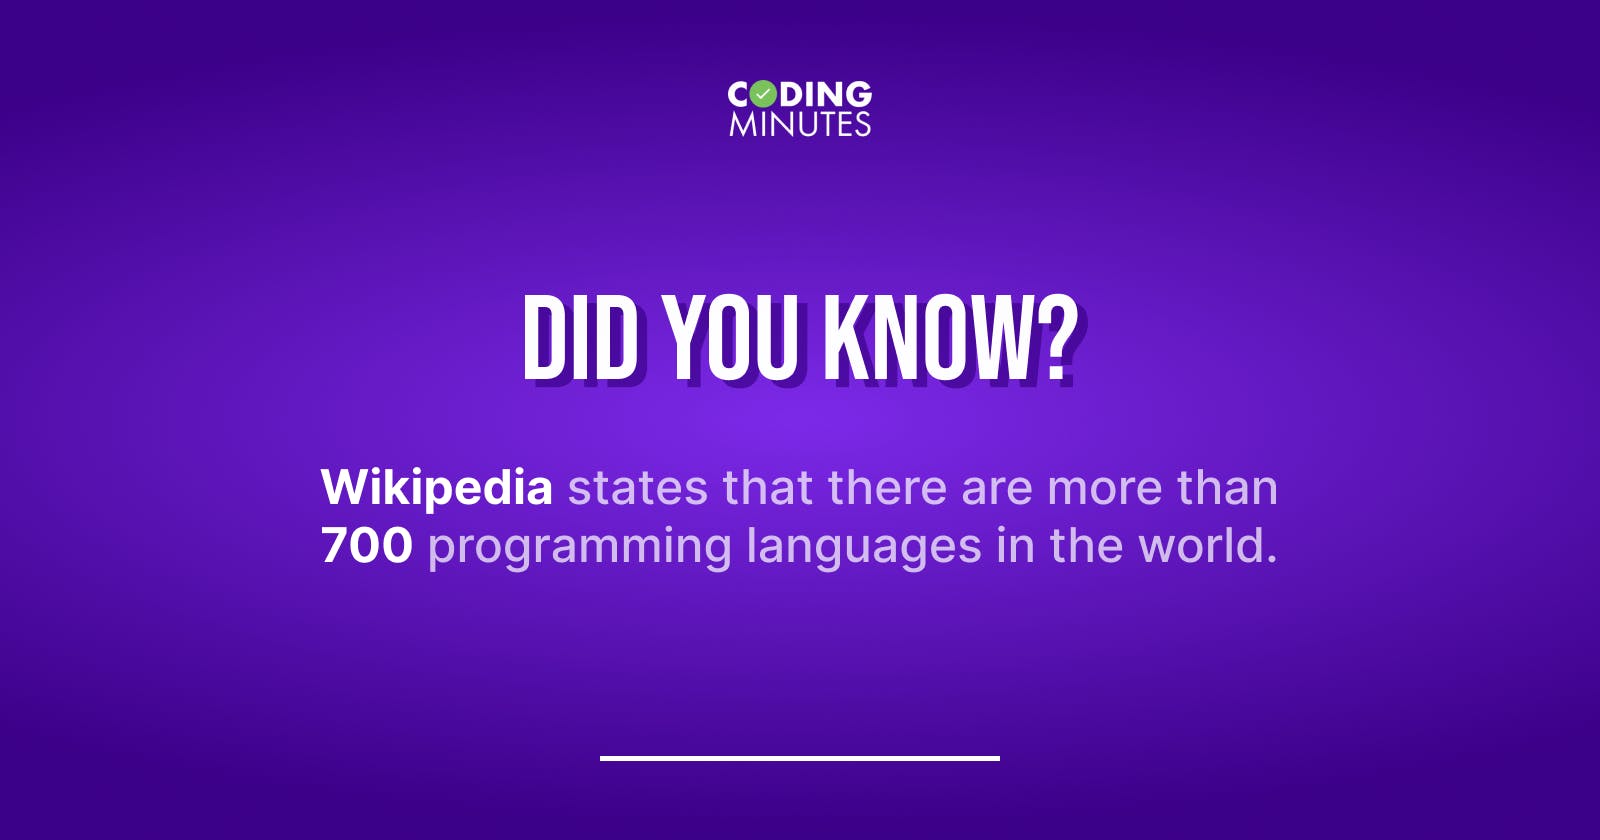 There are more than 700 programming languages in the world